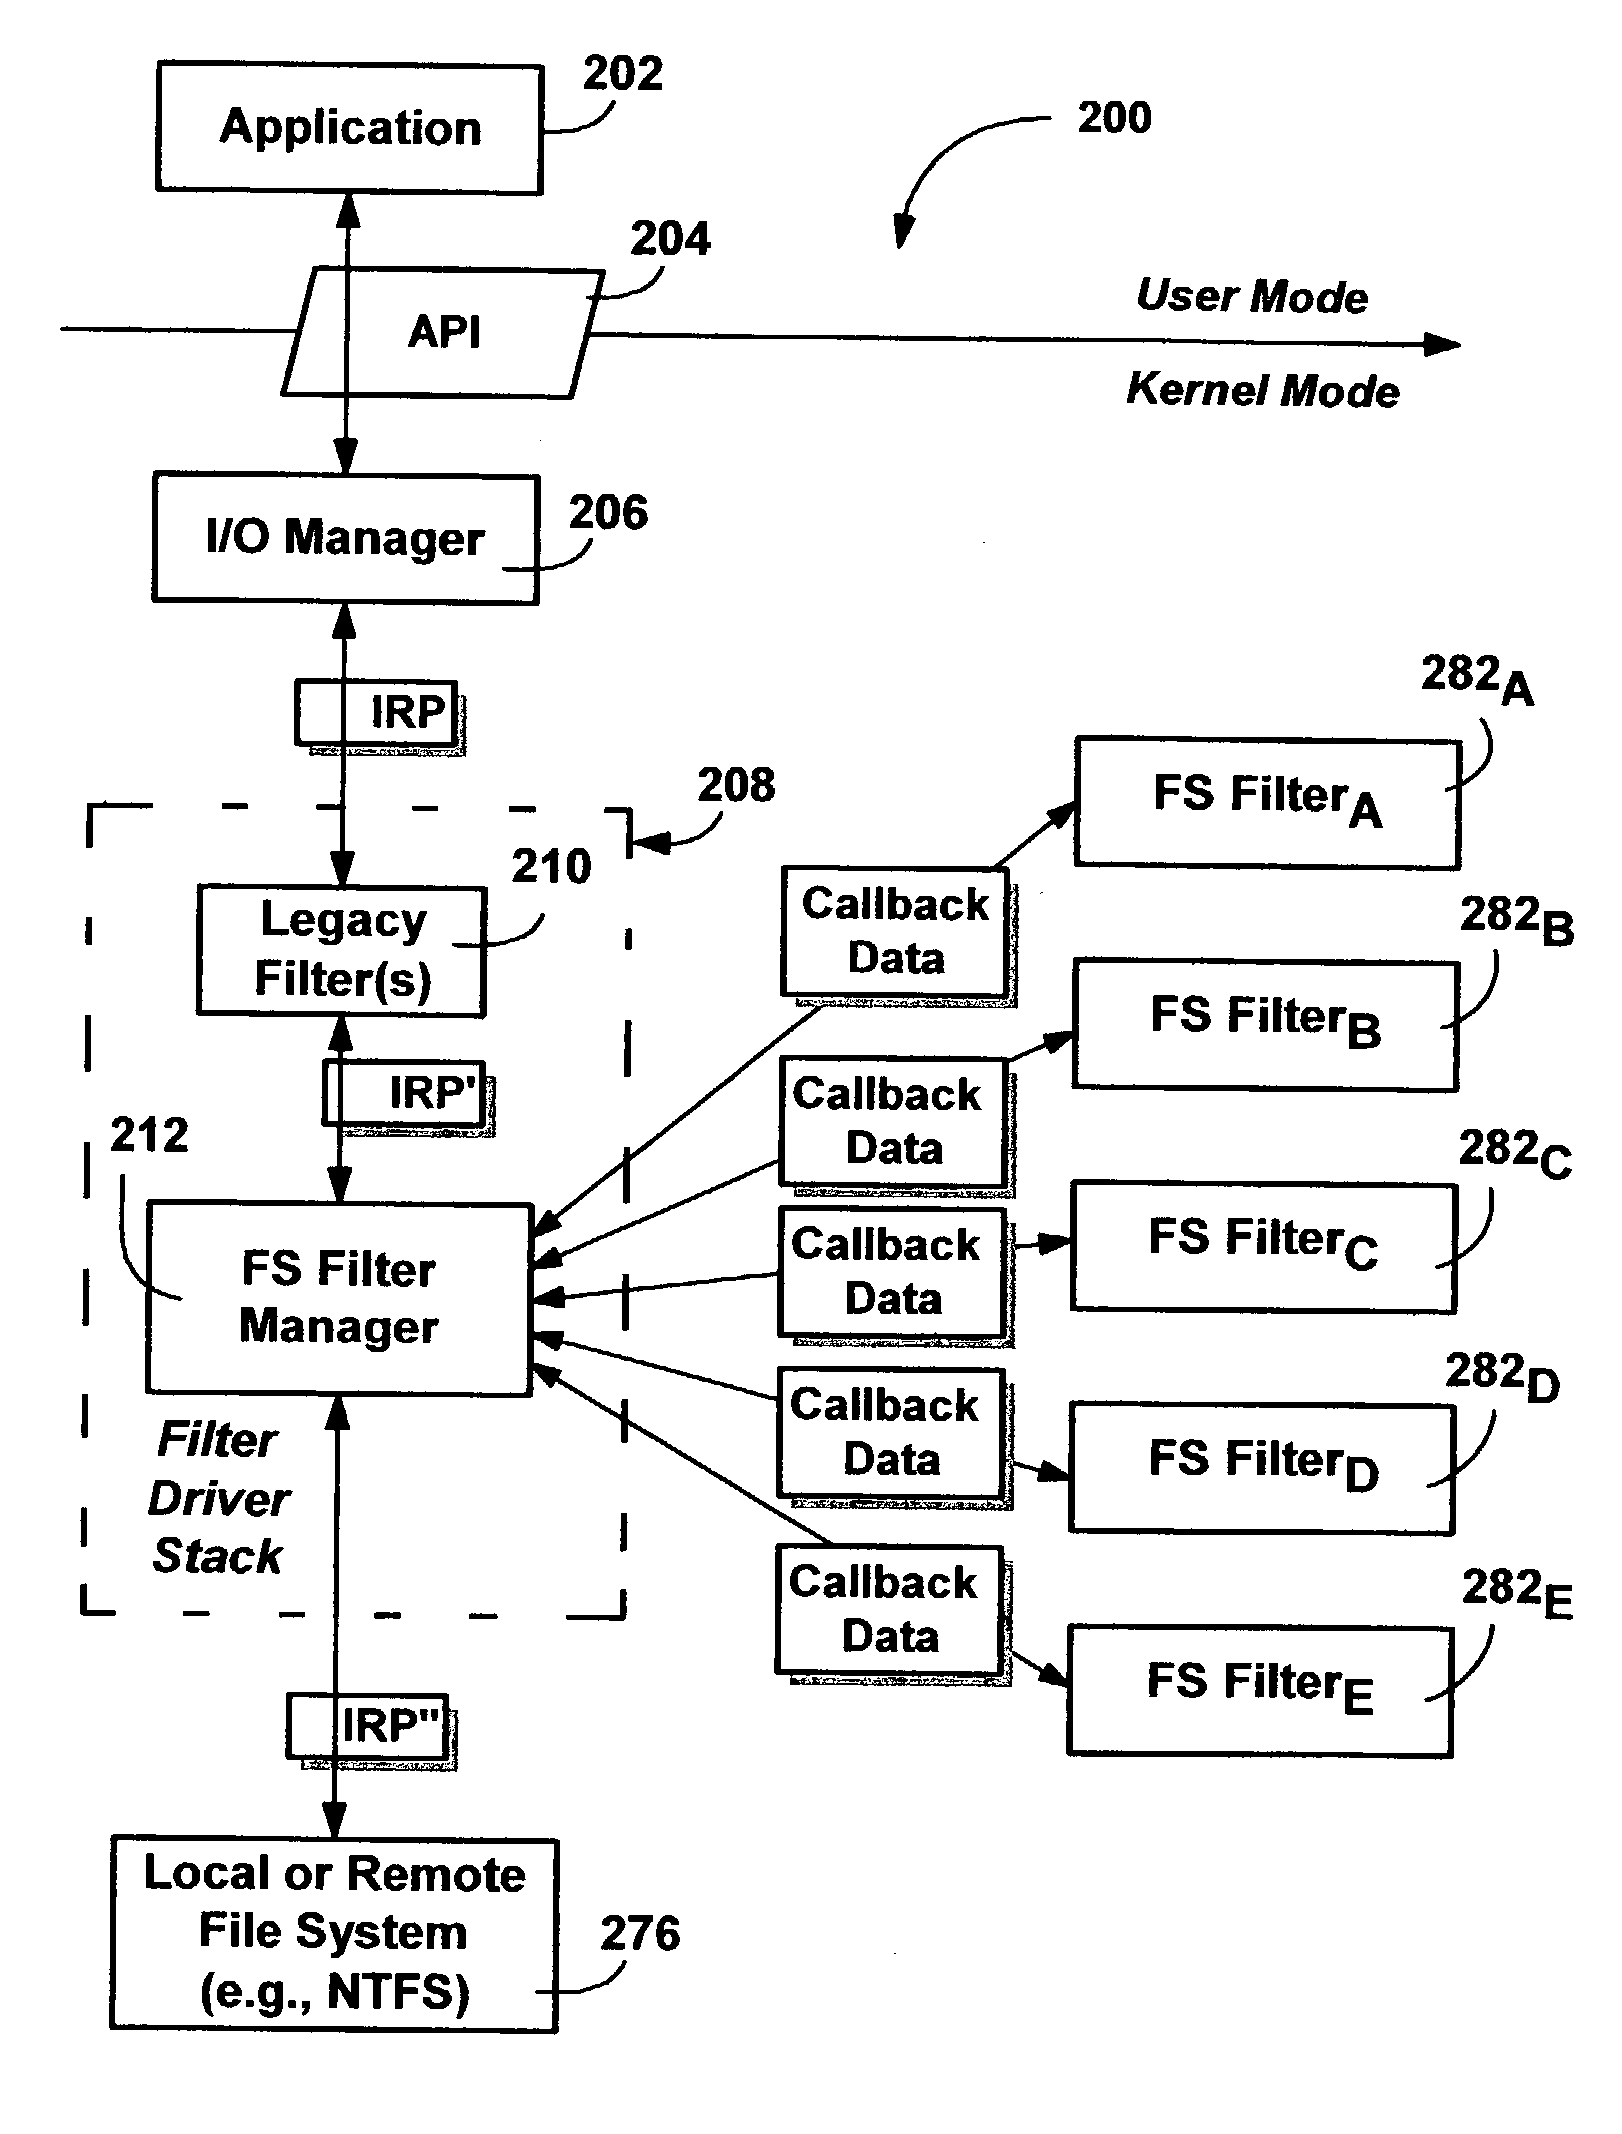 Managed file system filter model and architecture